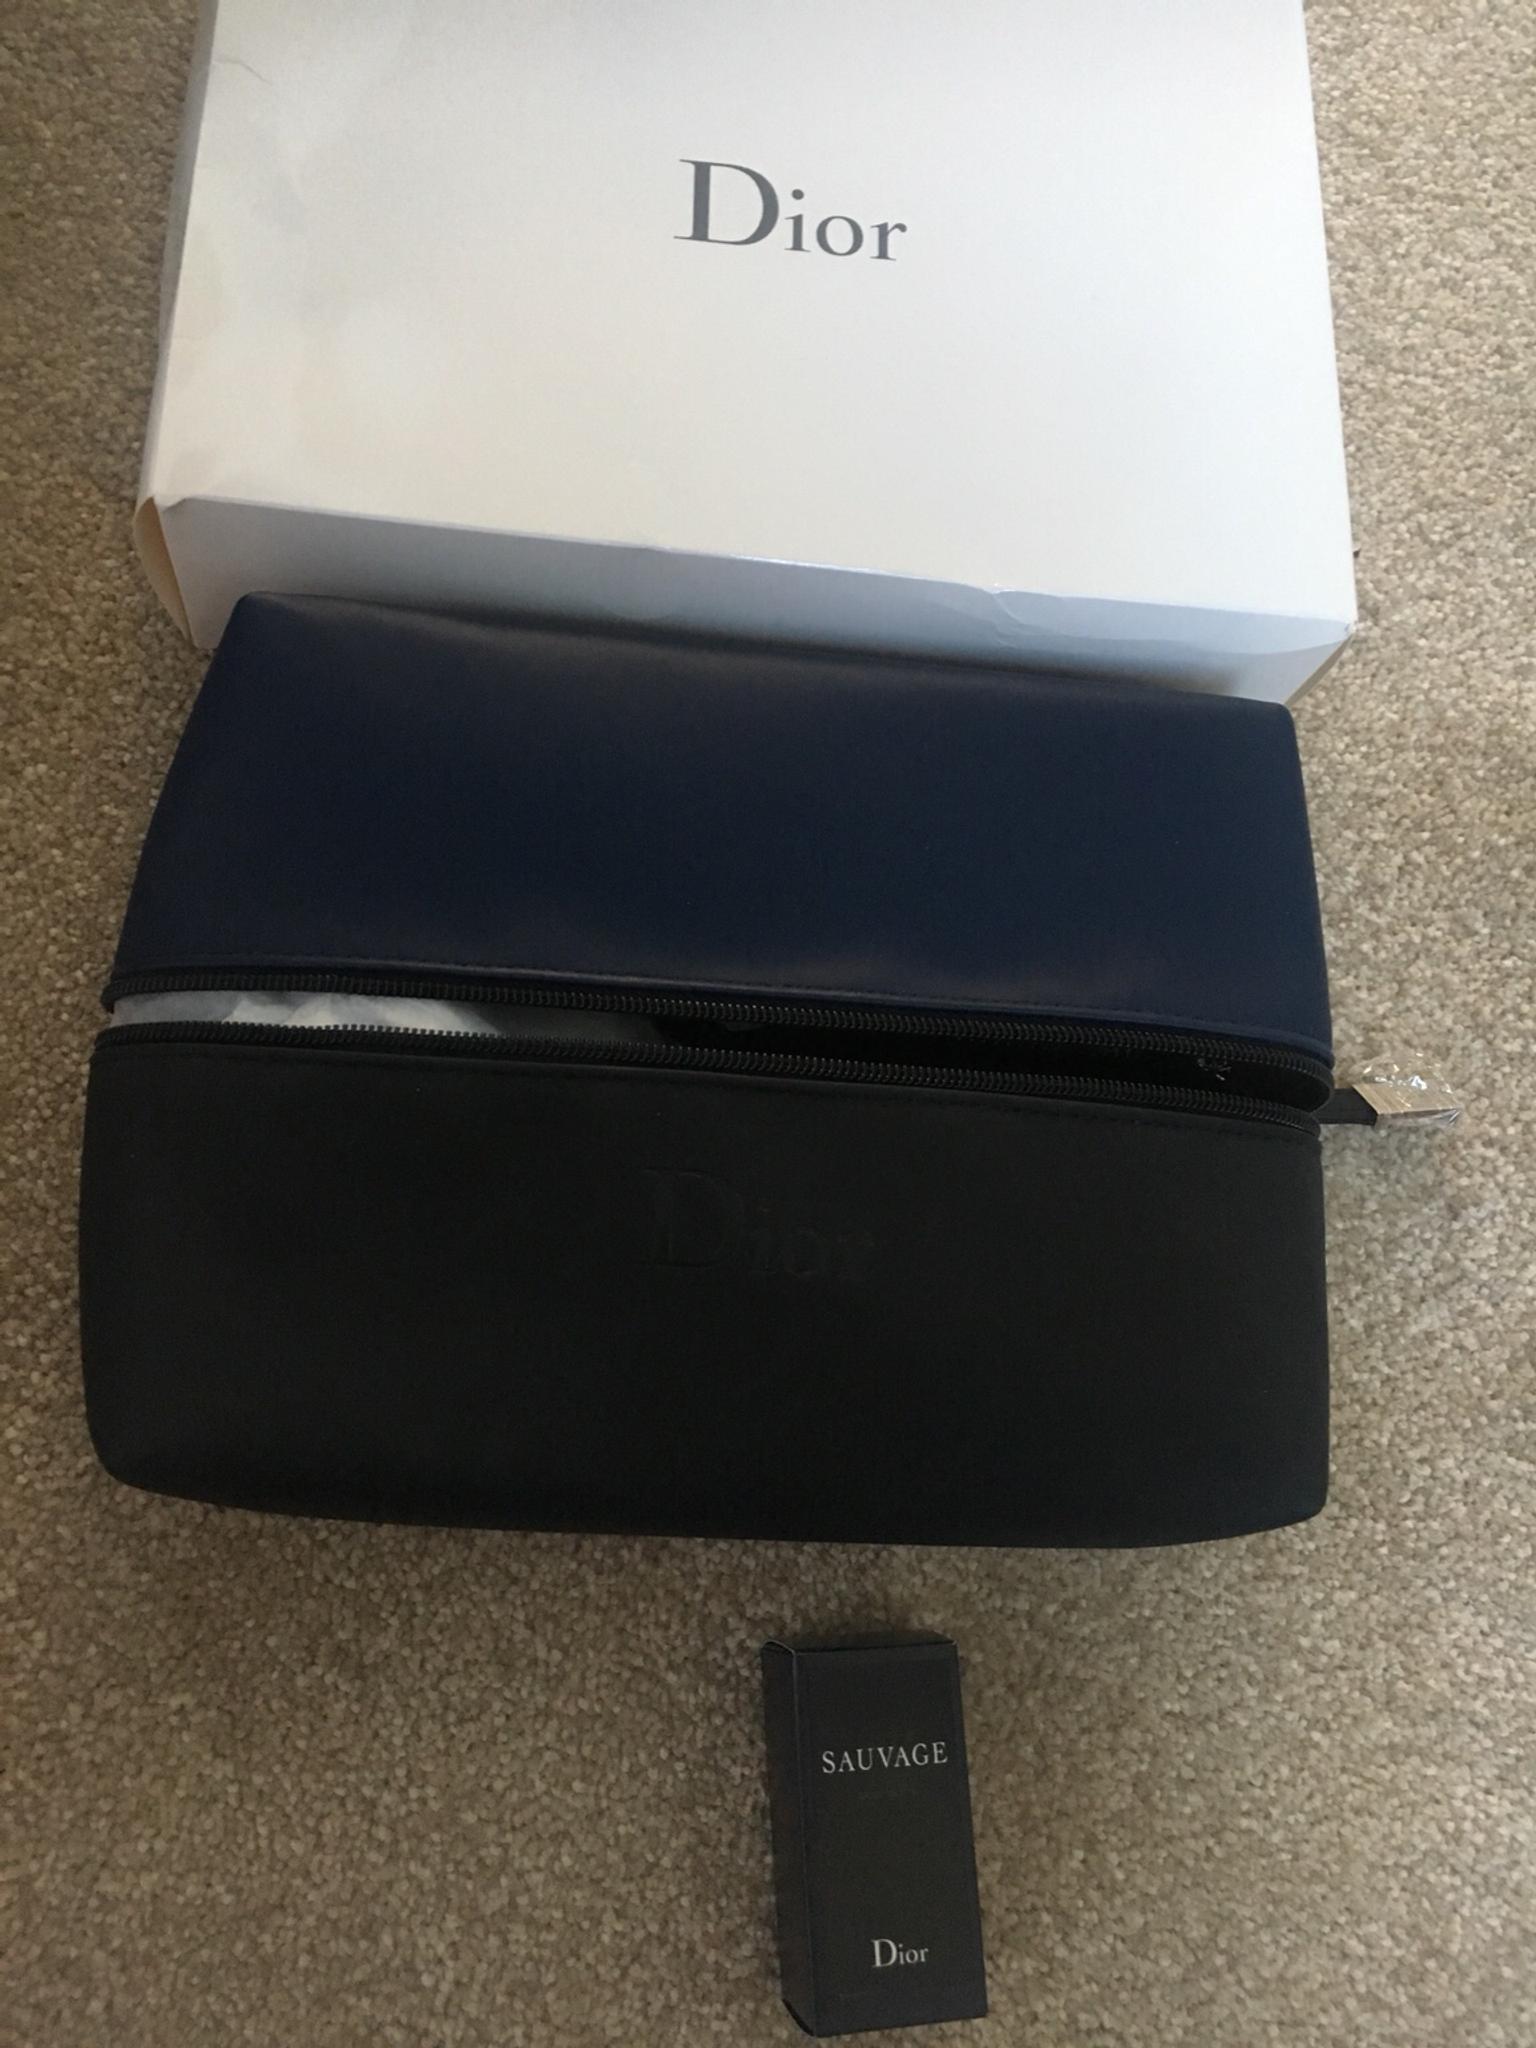 Dior Sauvage washbag and perfume in SM3 